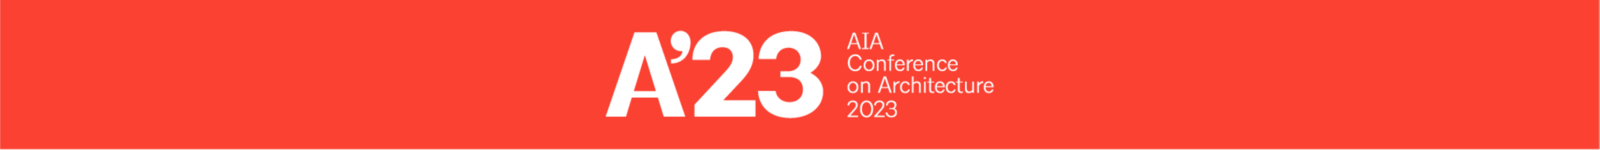 AIA Conference on Architecture 2023 logo